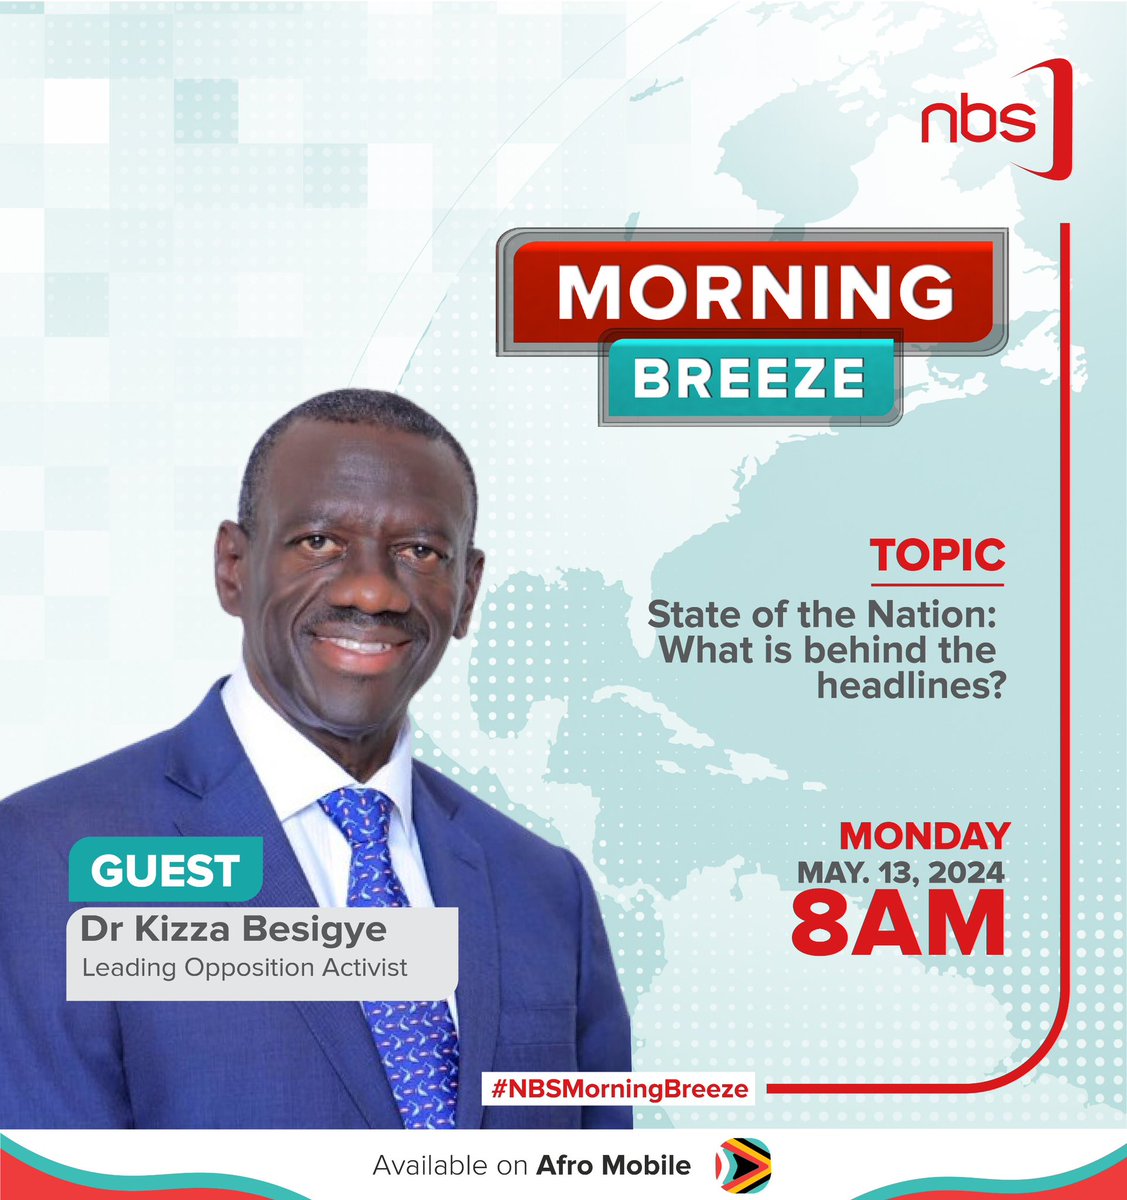 I’ll be hosted on NBS’s MORNING BREEZE program tomorrow, Monday, 13th May, from 8am. Please tune in and participate. Have a blessed week.